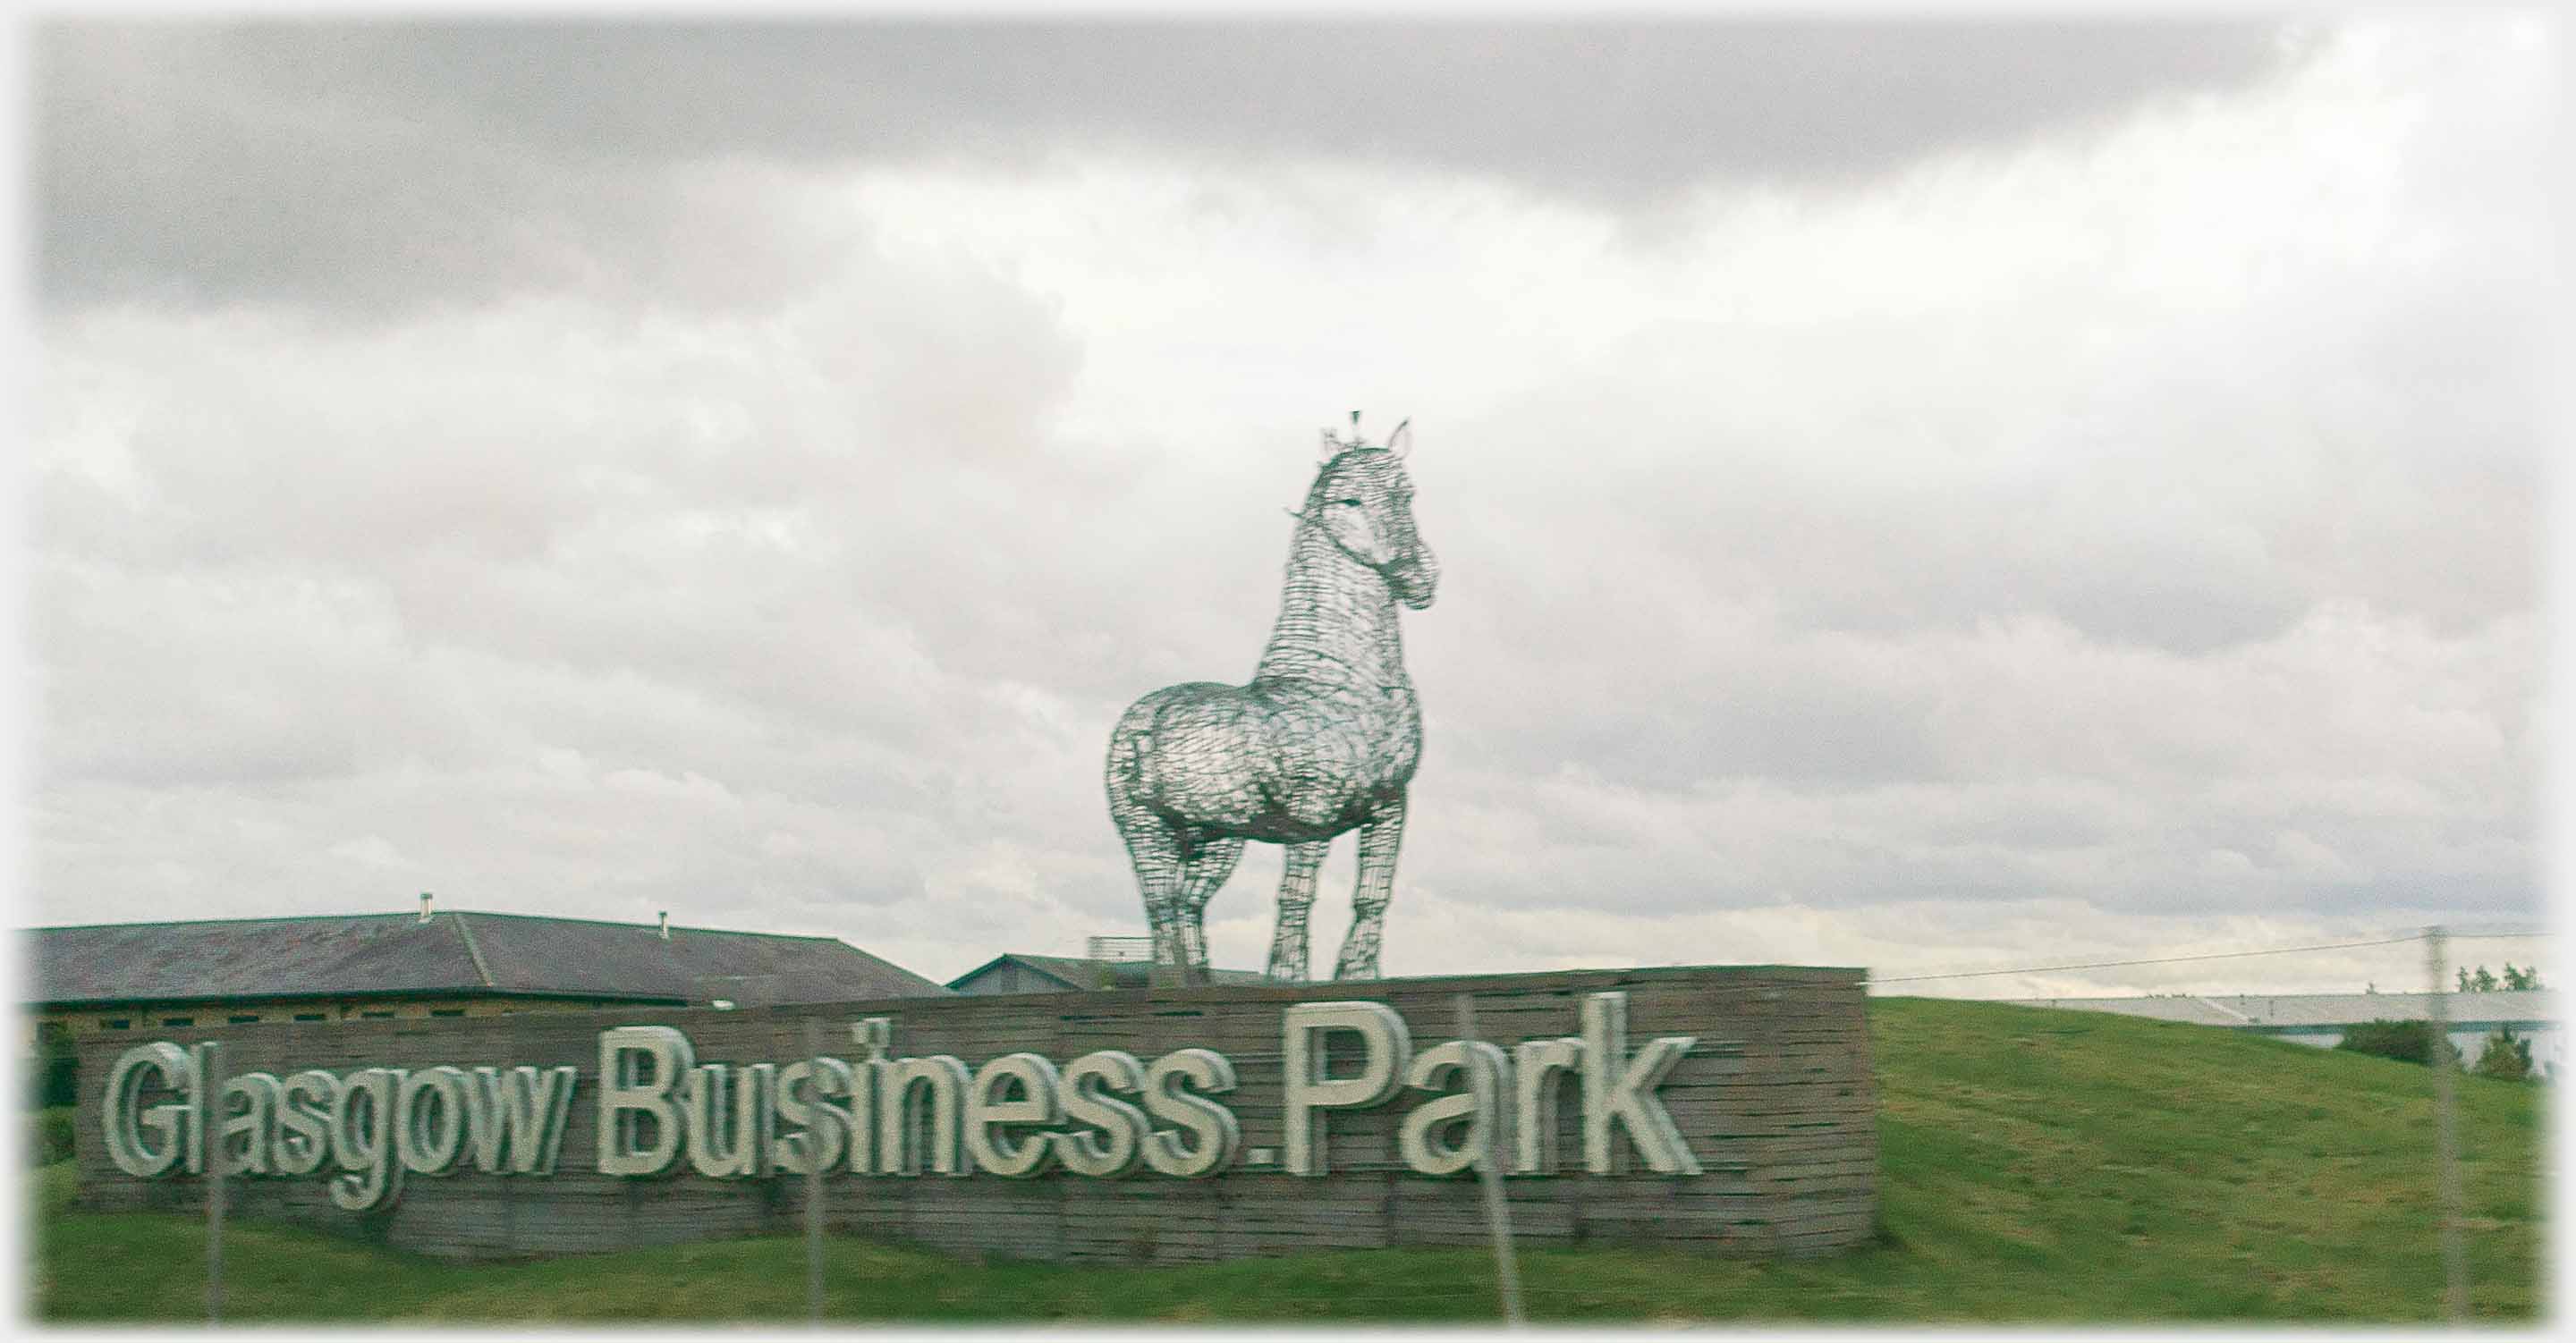 Large wire horse and sign 'Glasgow Business Park'.